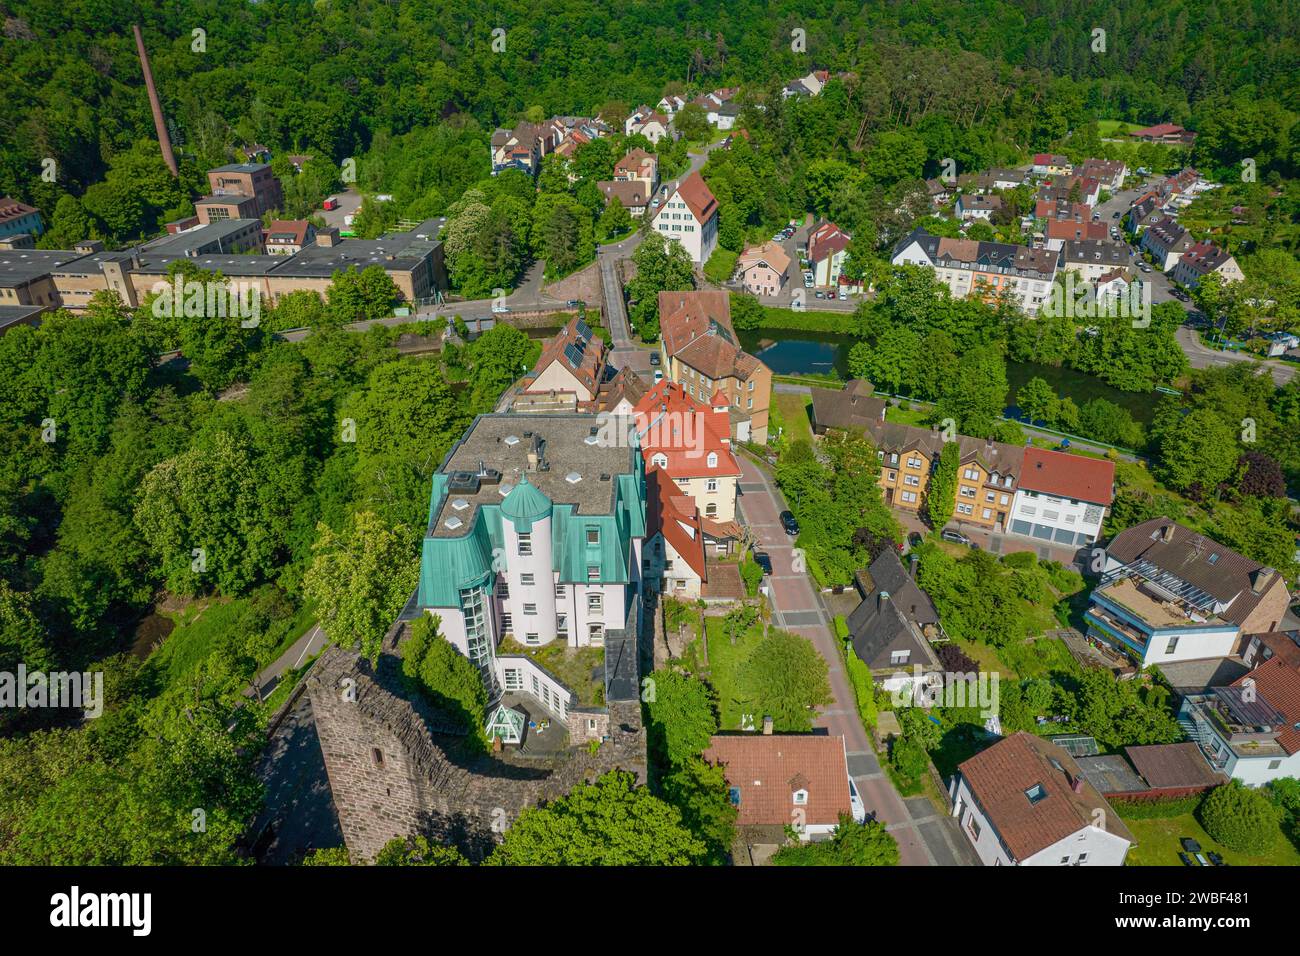 Drone view of a small town with green roofs and dense woodland, Pforzheim, Rabeneck Youth Hostel, Germany Stock Photo